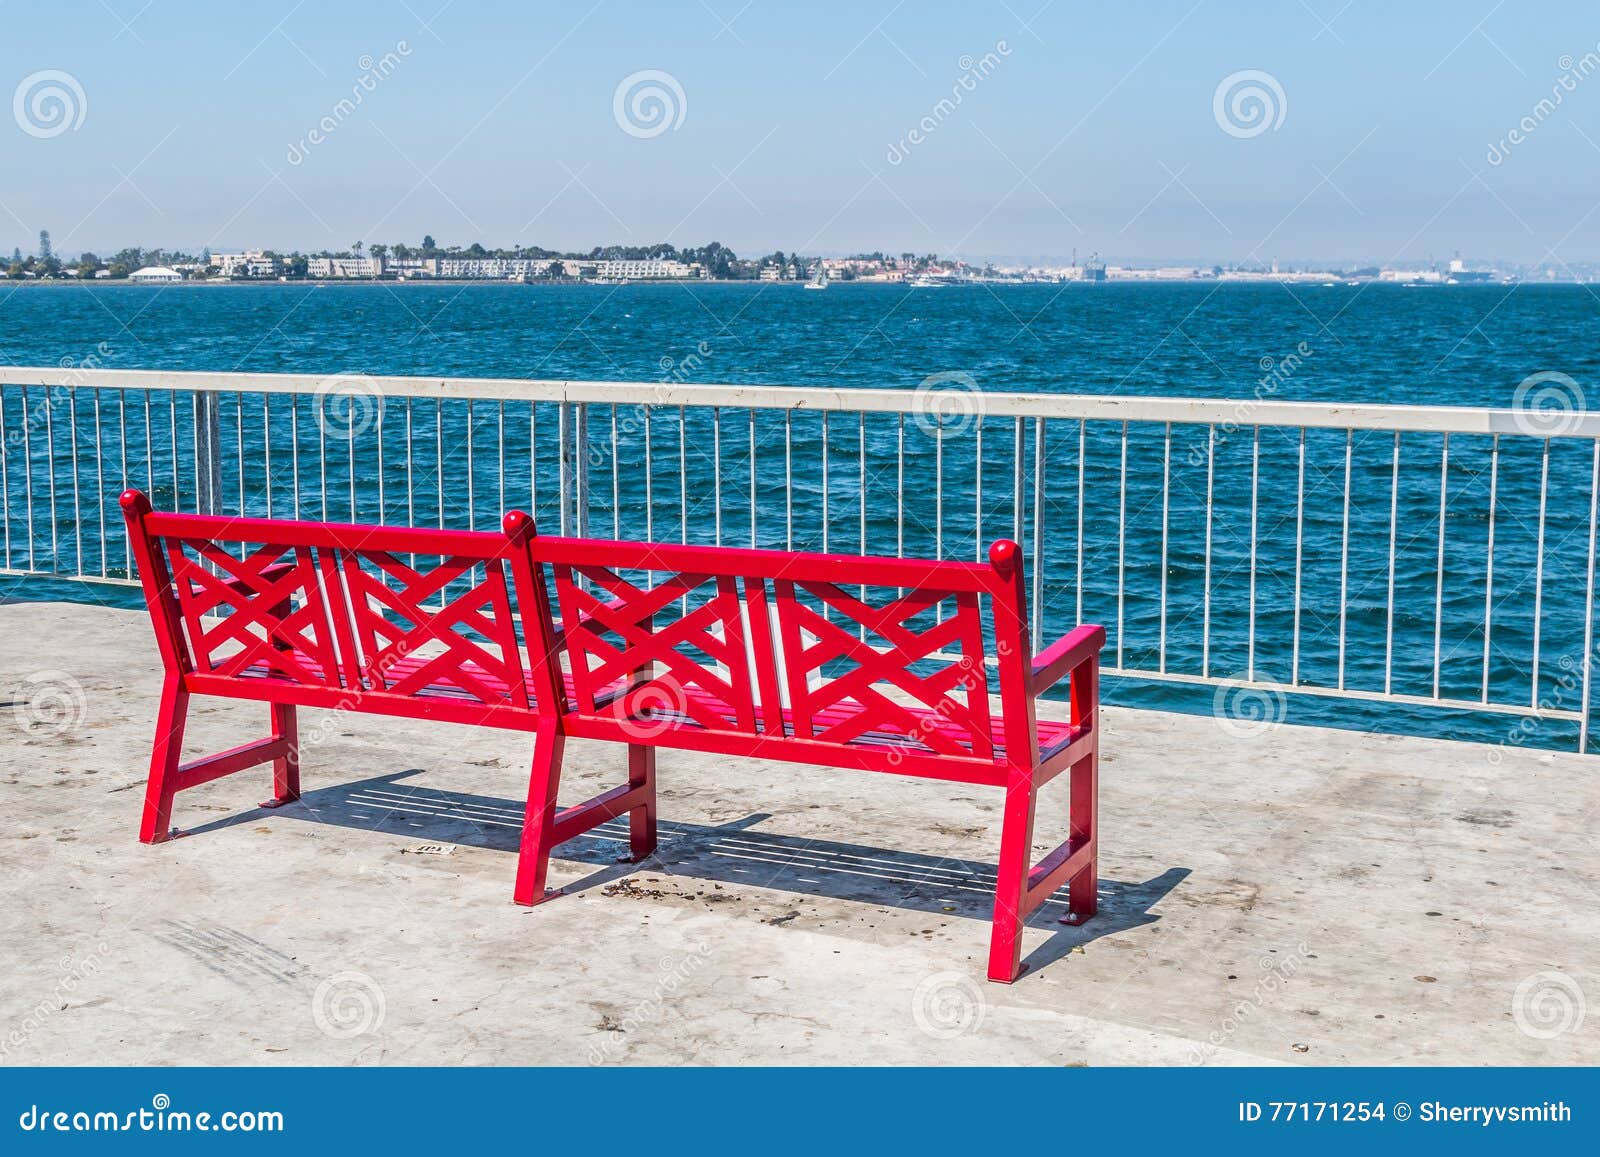 red bench on pier at cesar chavez park